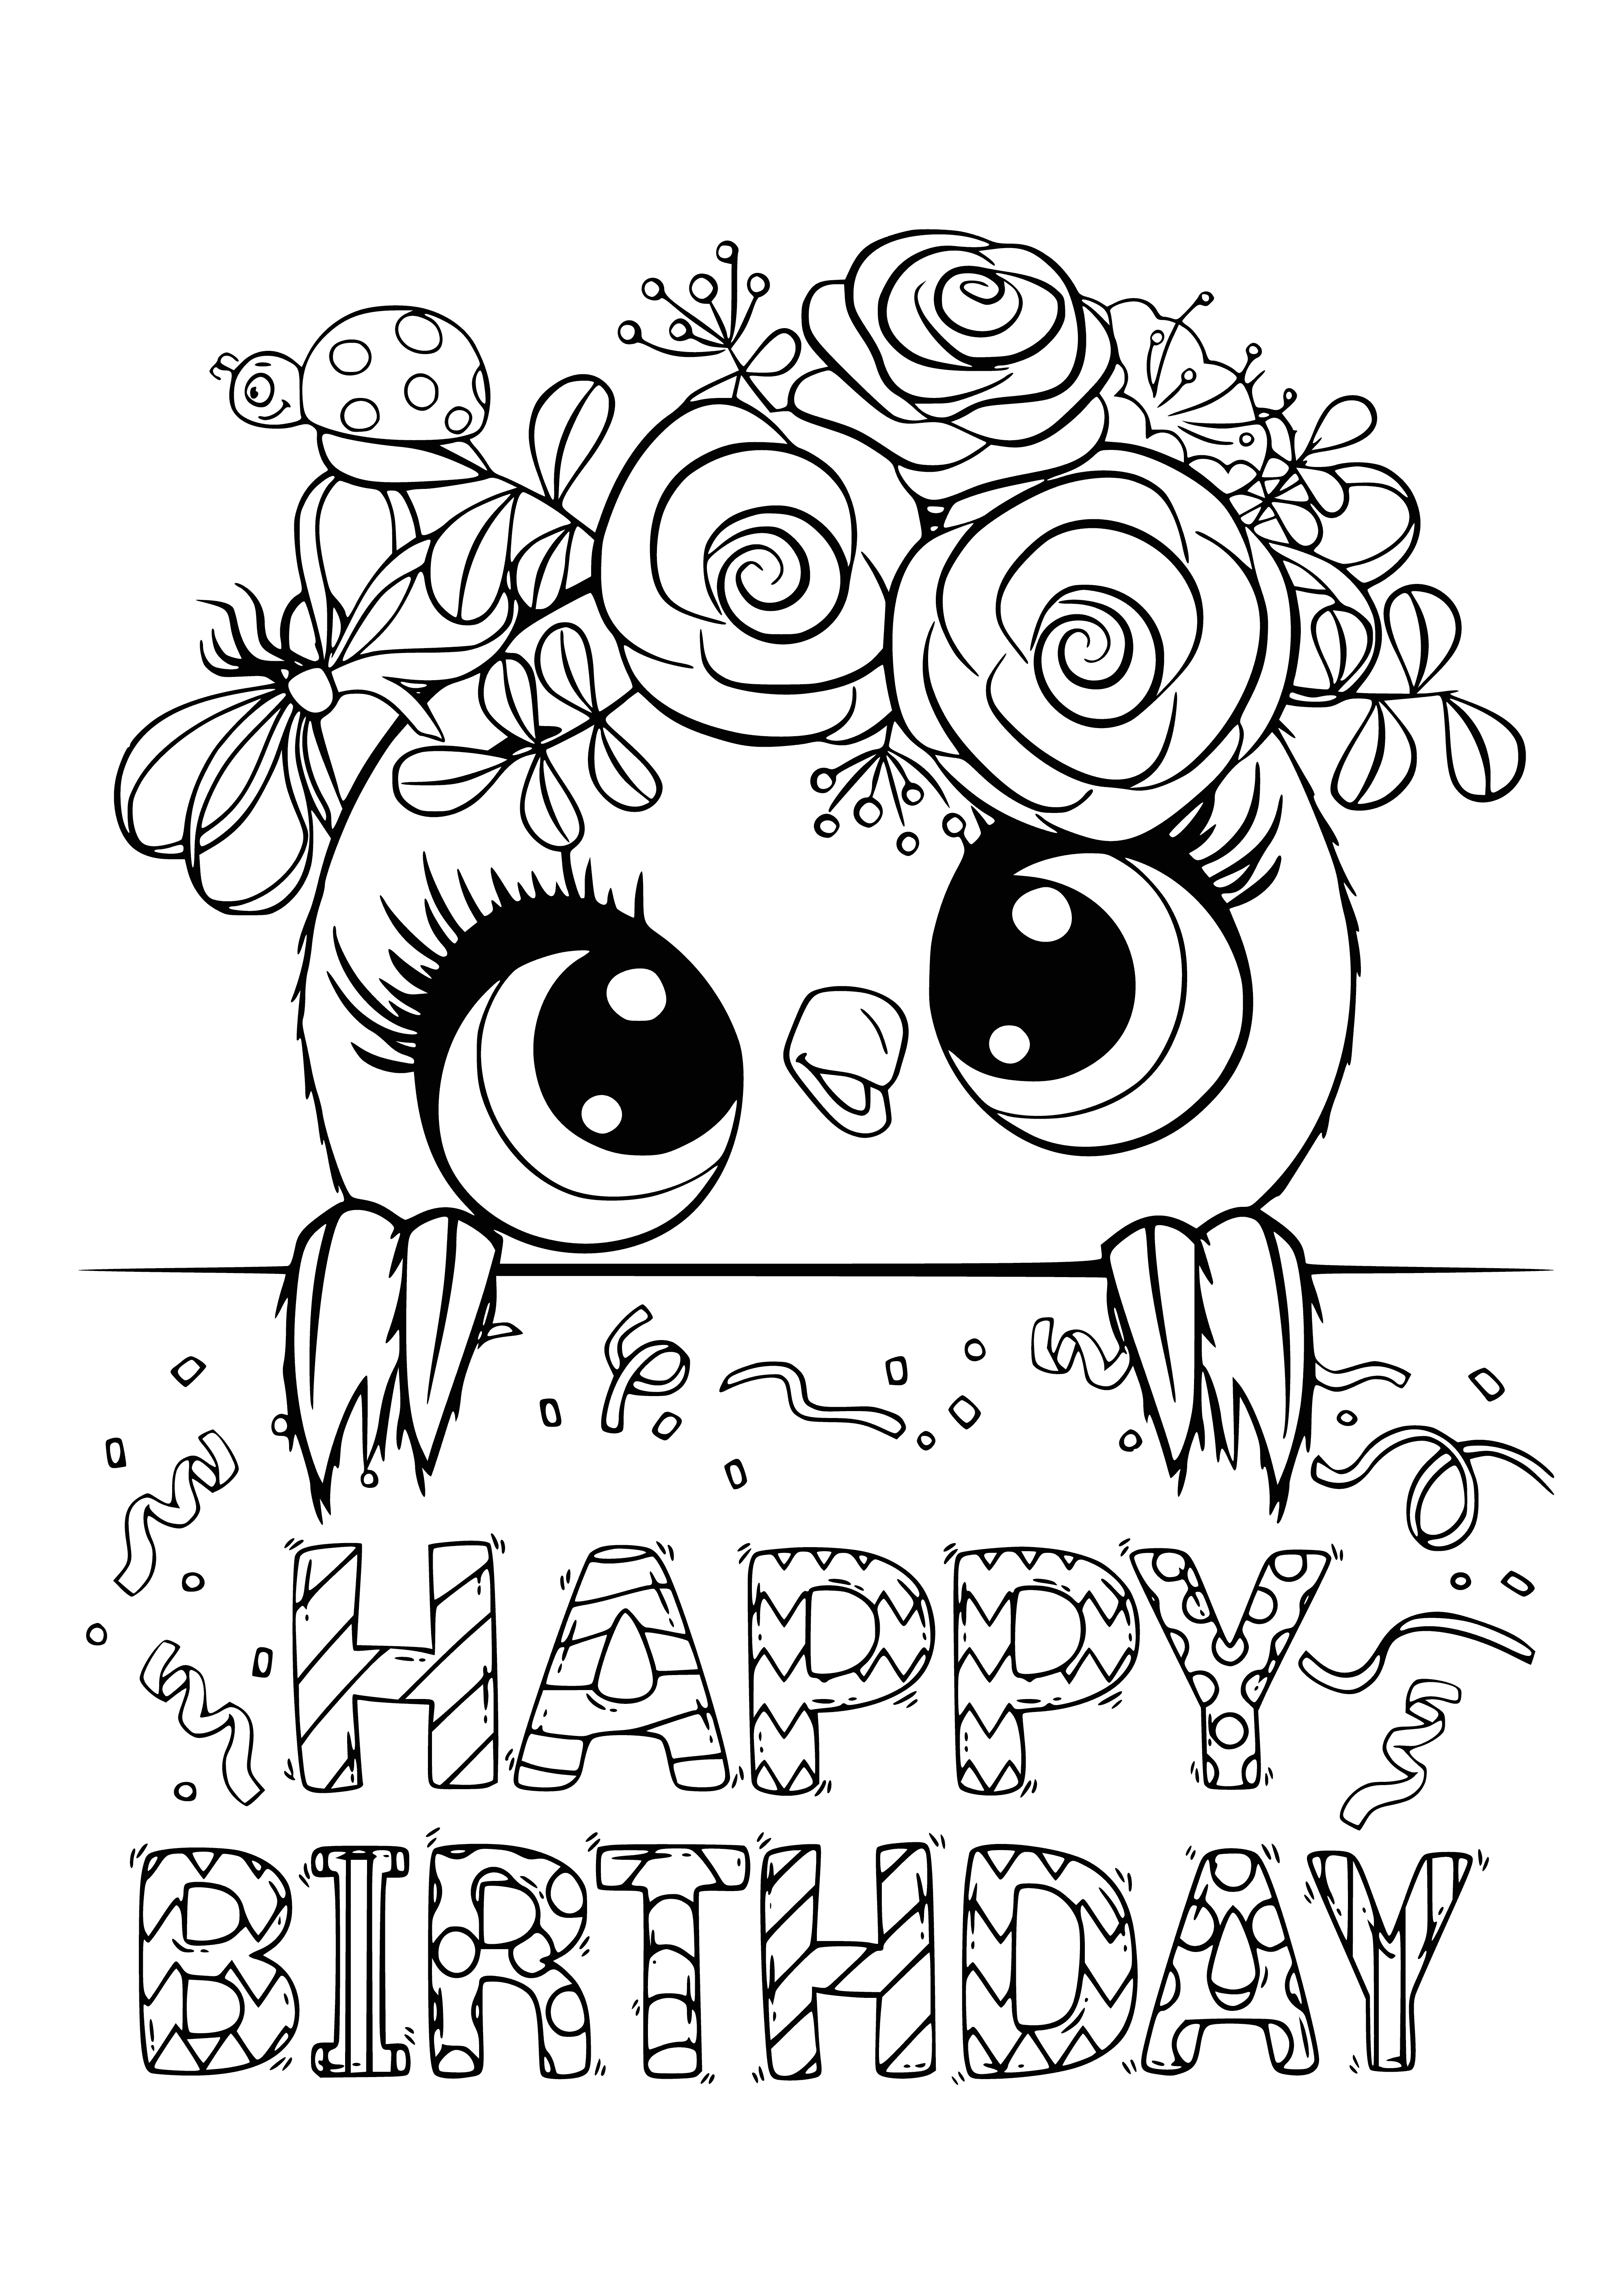 Happy birthday! coloring page